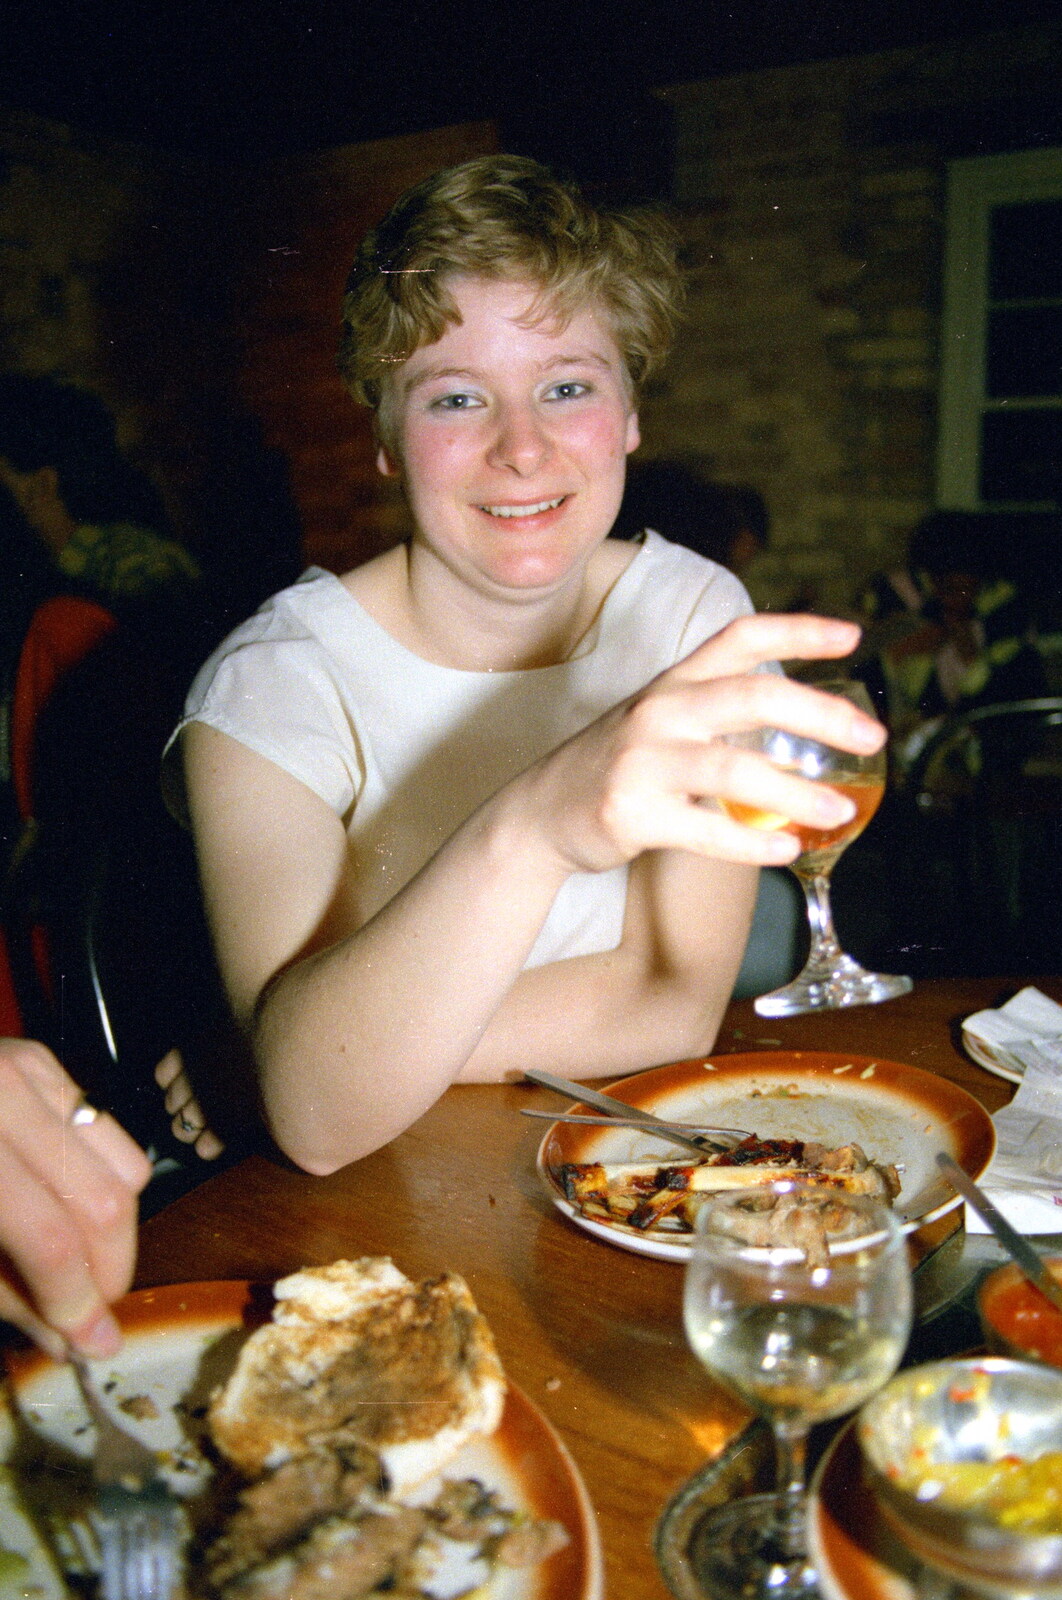 Anna raises a glass from A Trip to Trinity College, Cambridge - 23rd March 1986